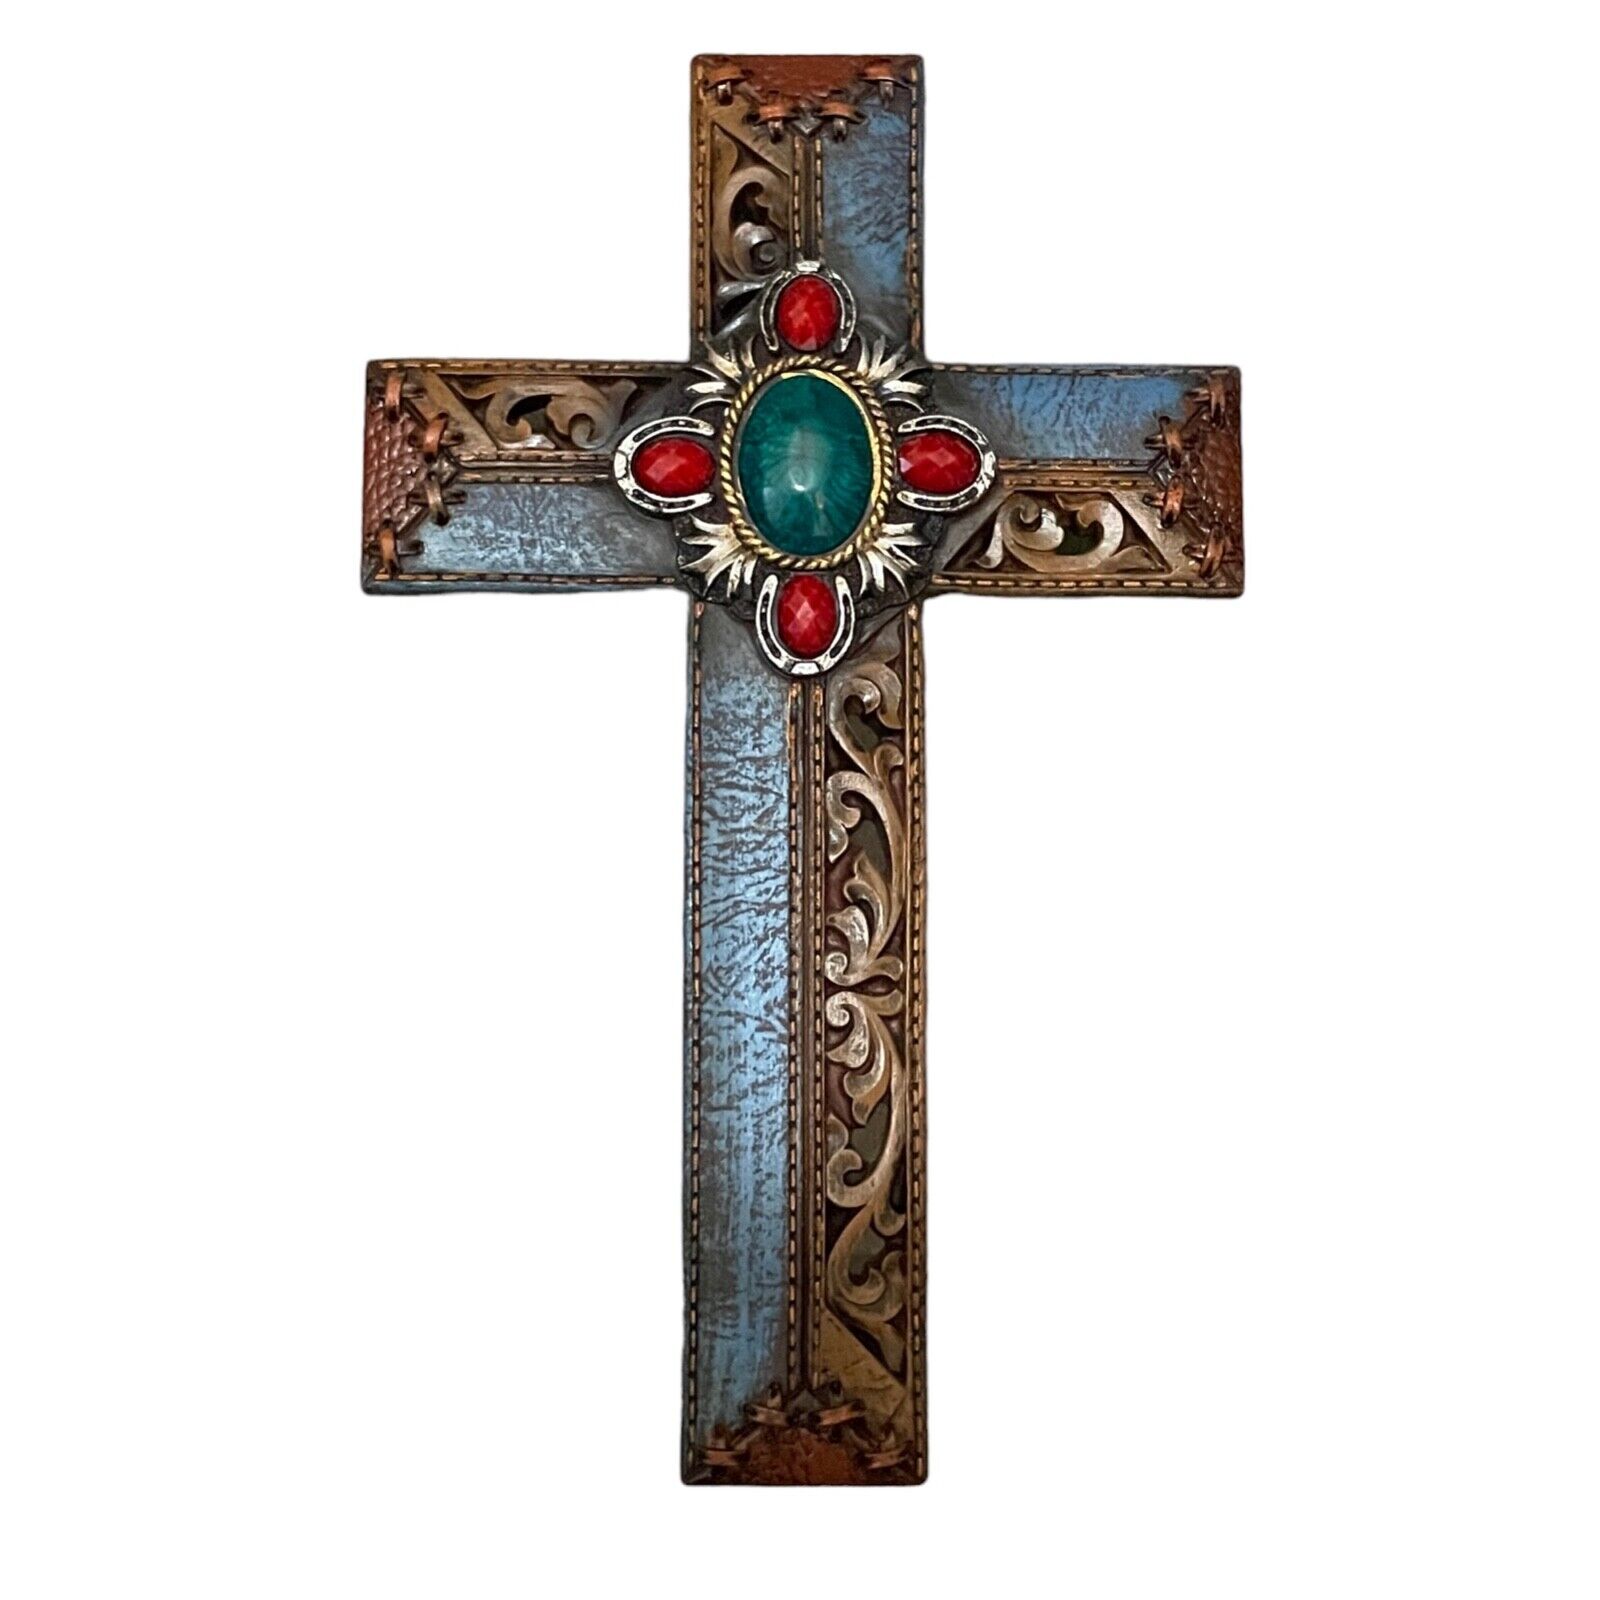 Rustic Western Tuscany Scrollwork Turquoise Amber Gems Wall Cross